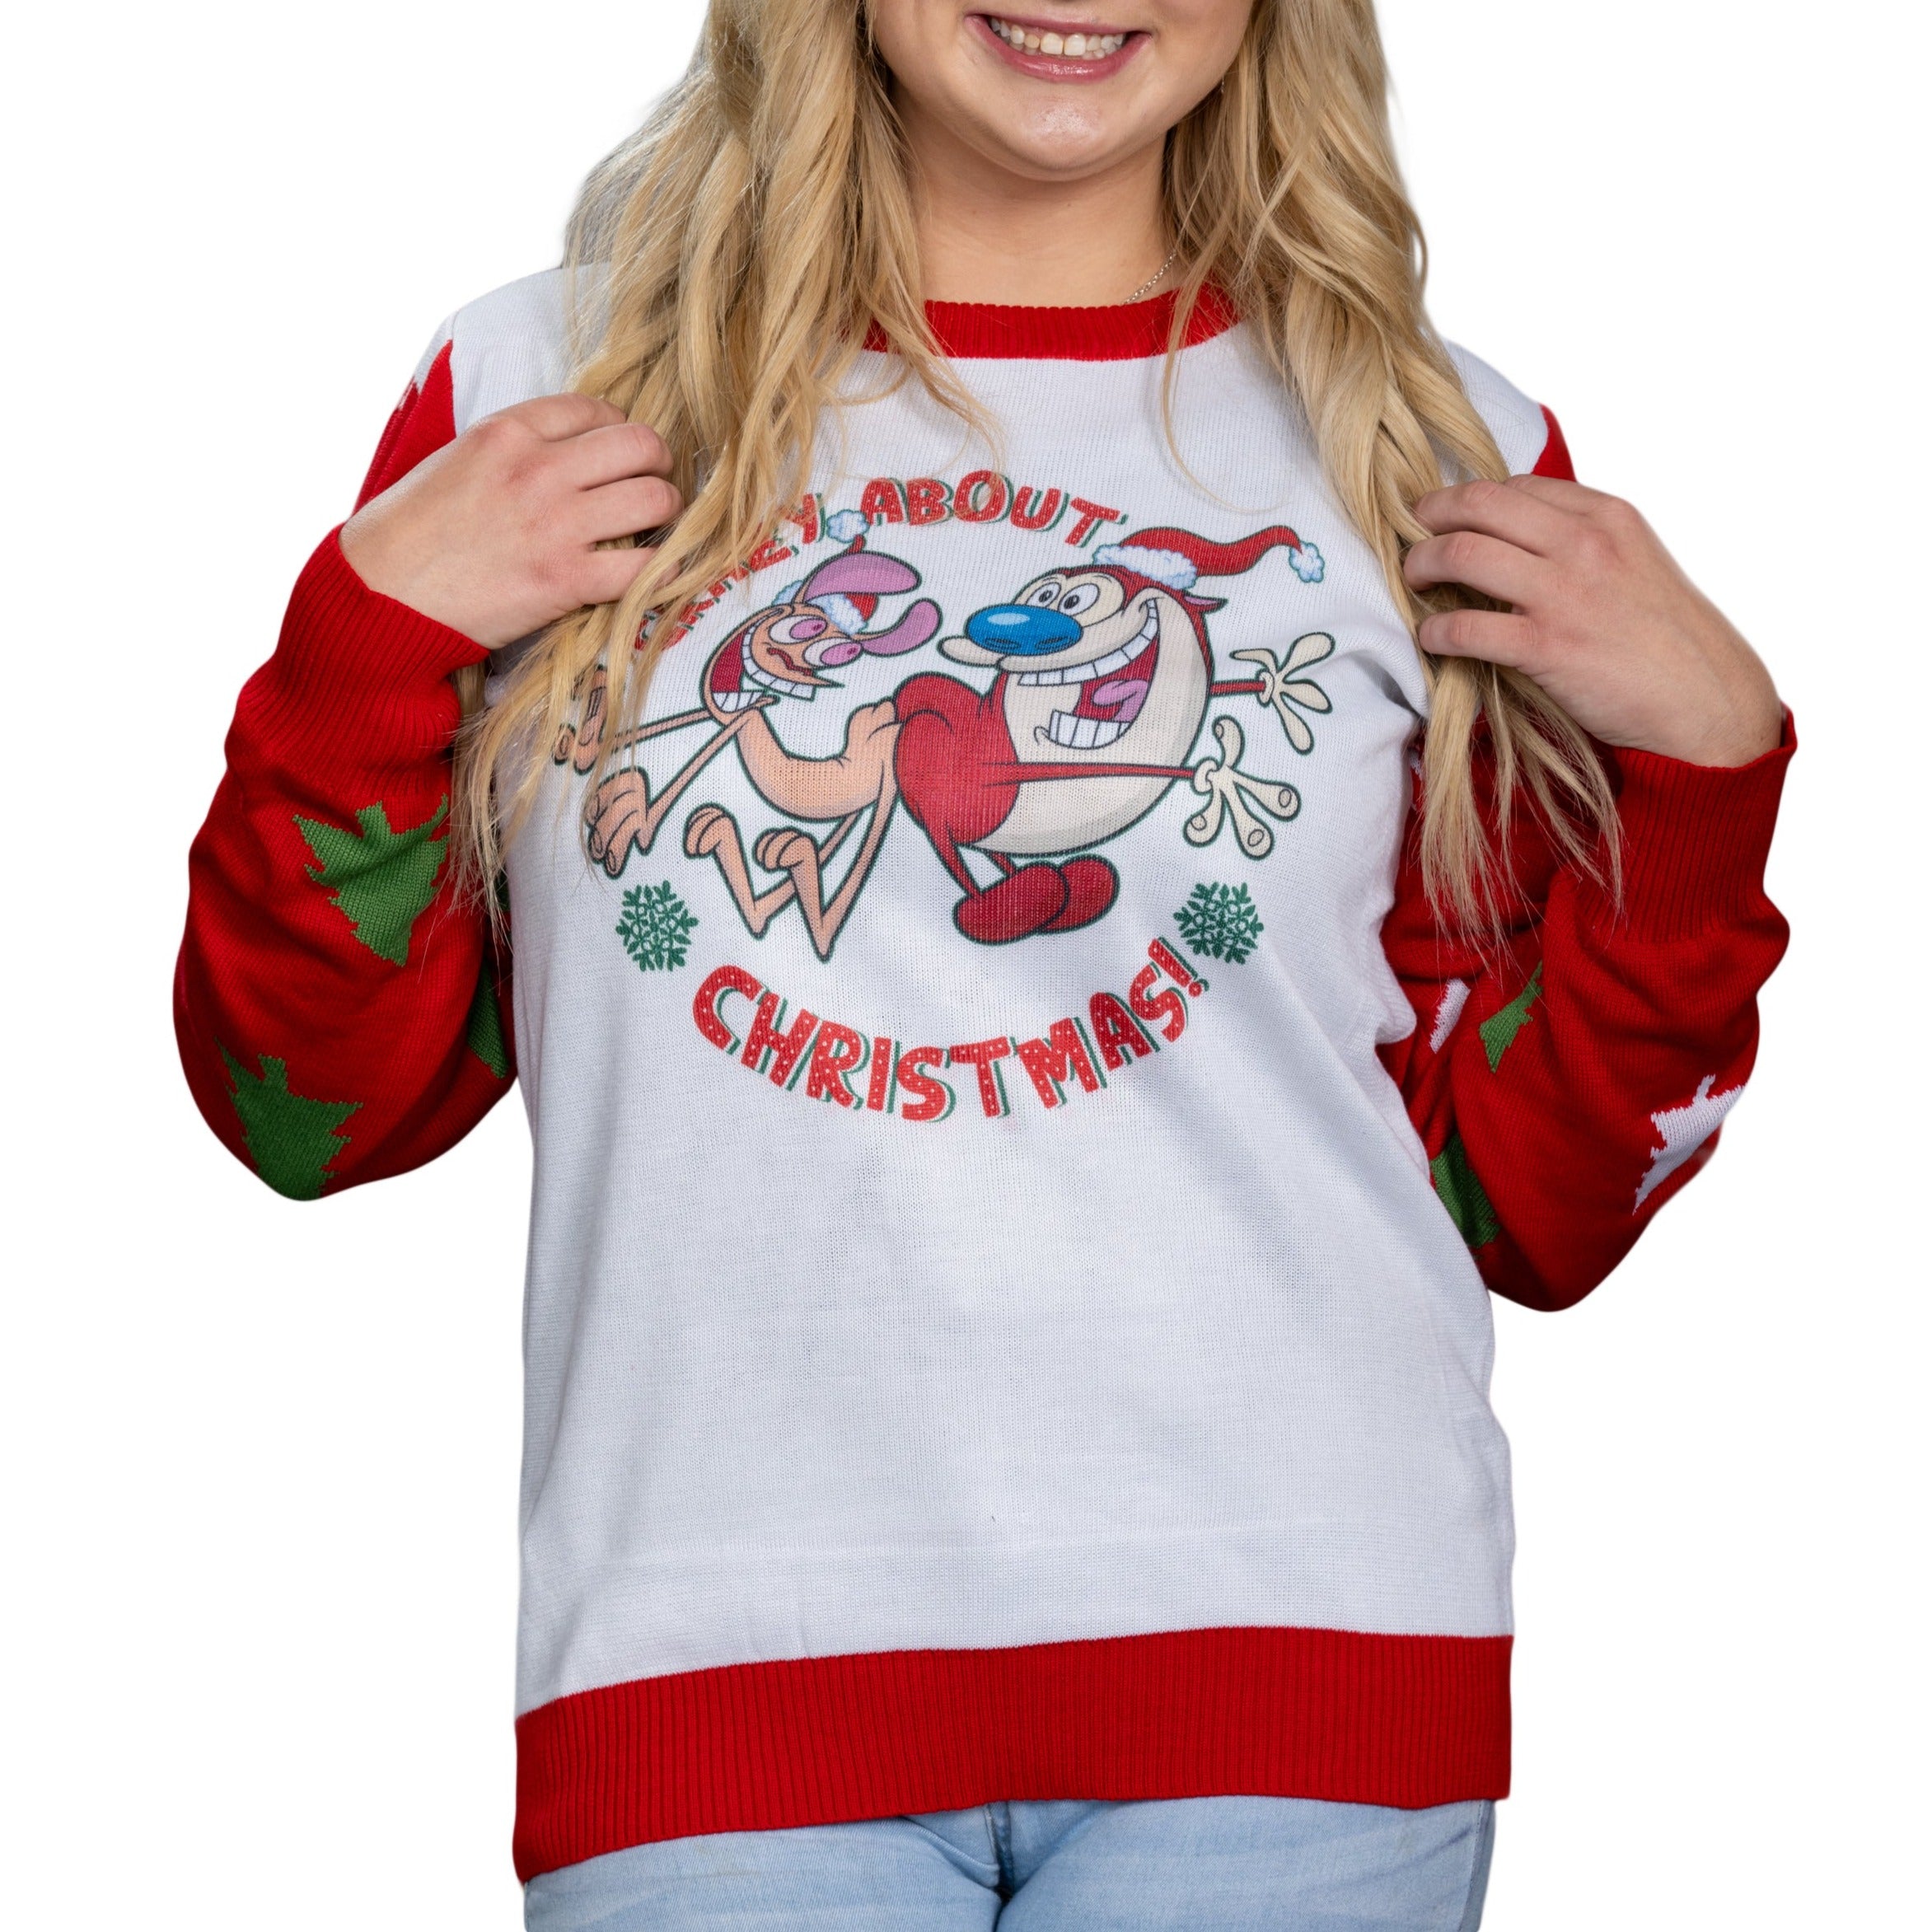 Ren & Stimpy | Crazy About Christmas Sweater